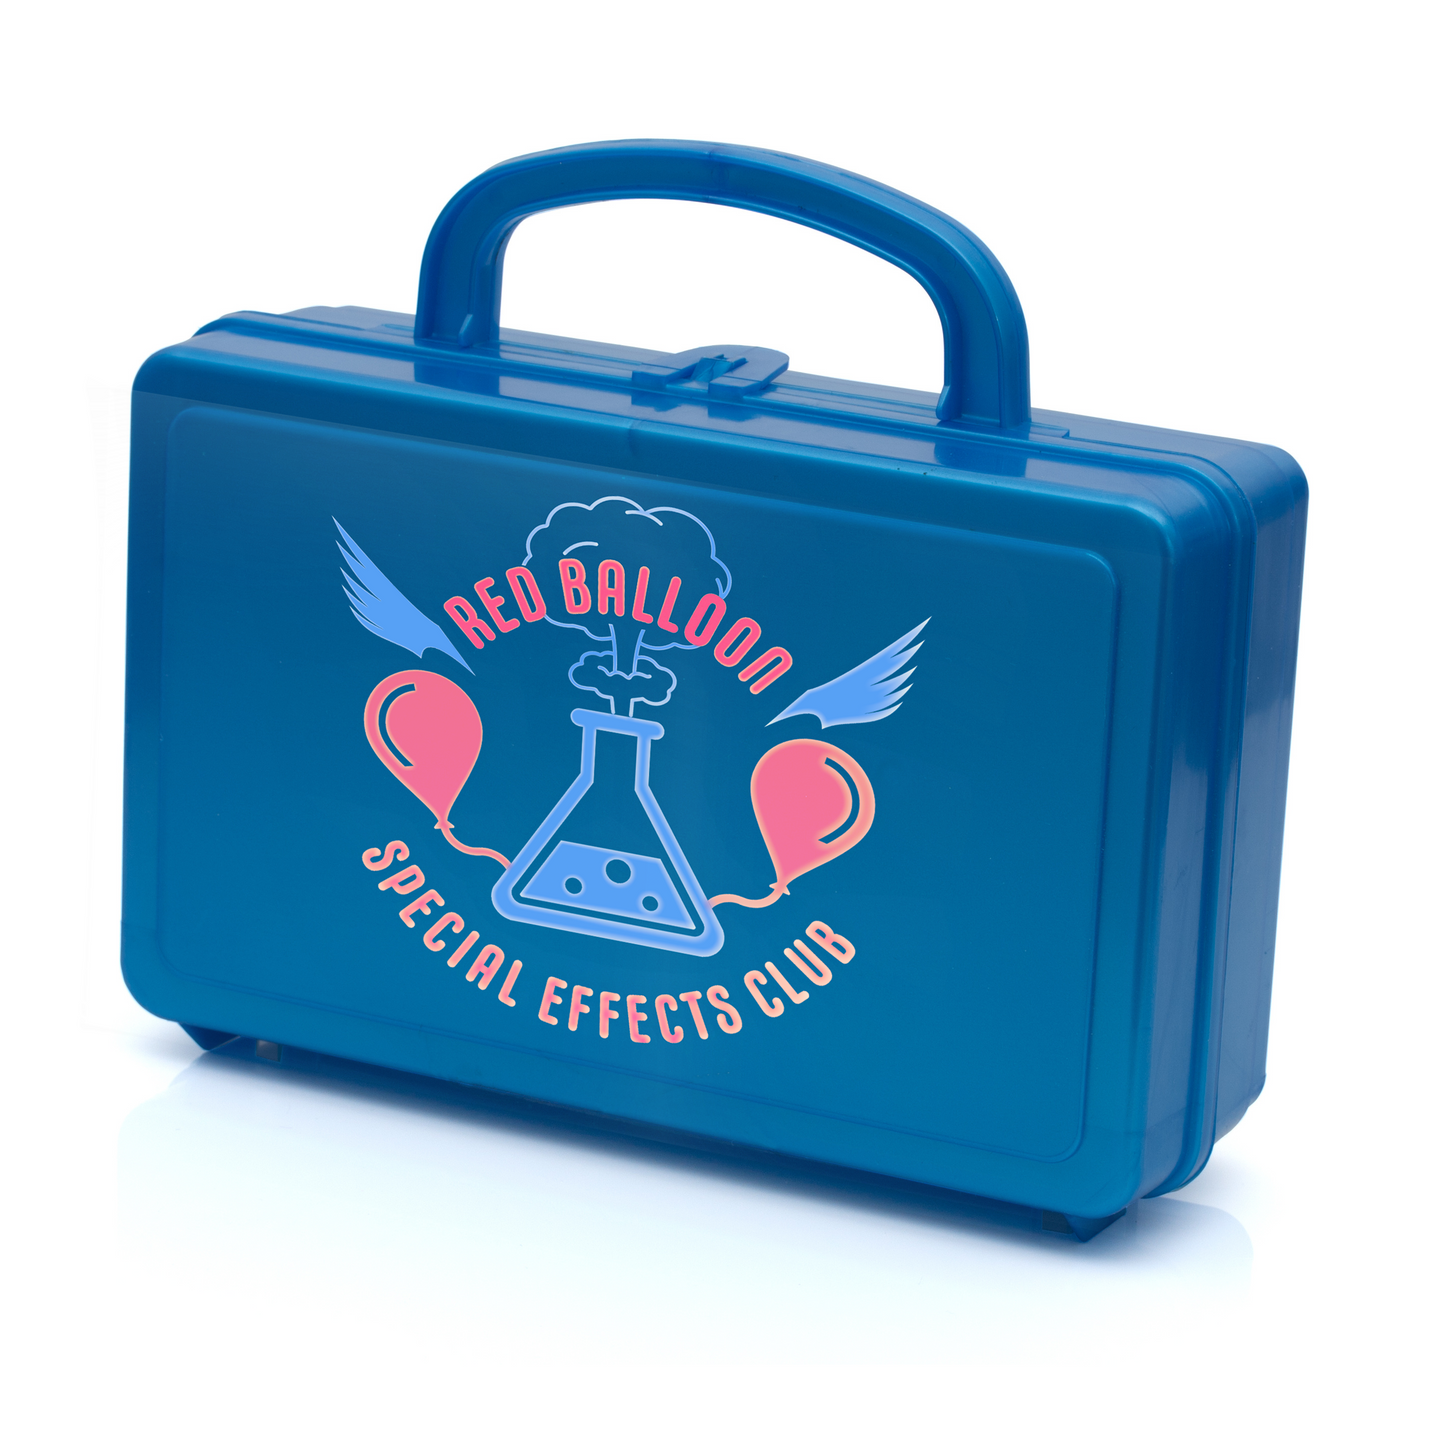 Special Effects Club - Lunch Box